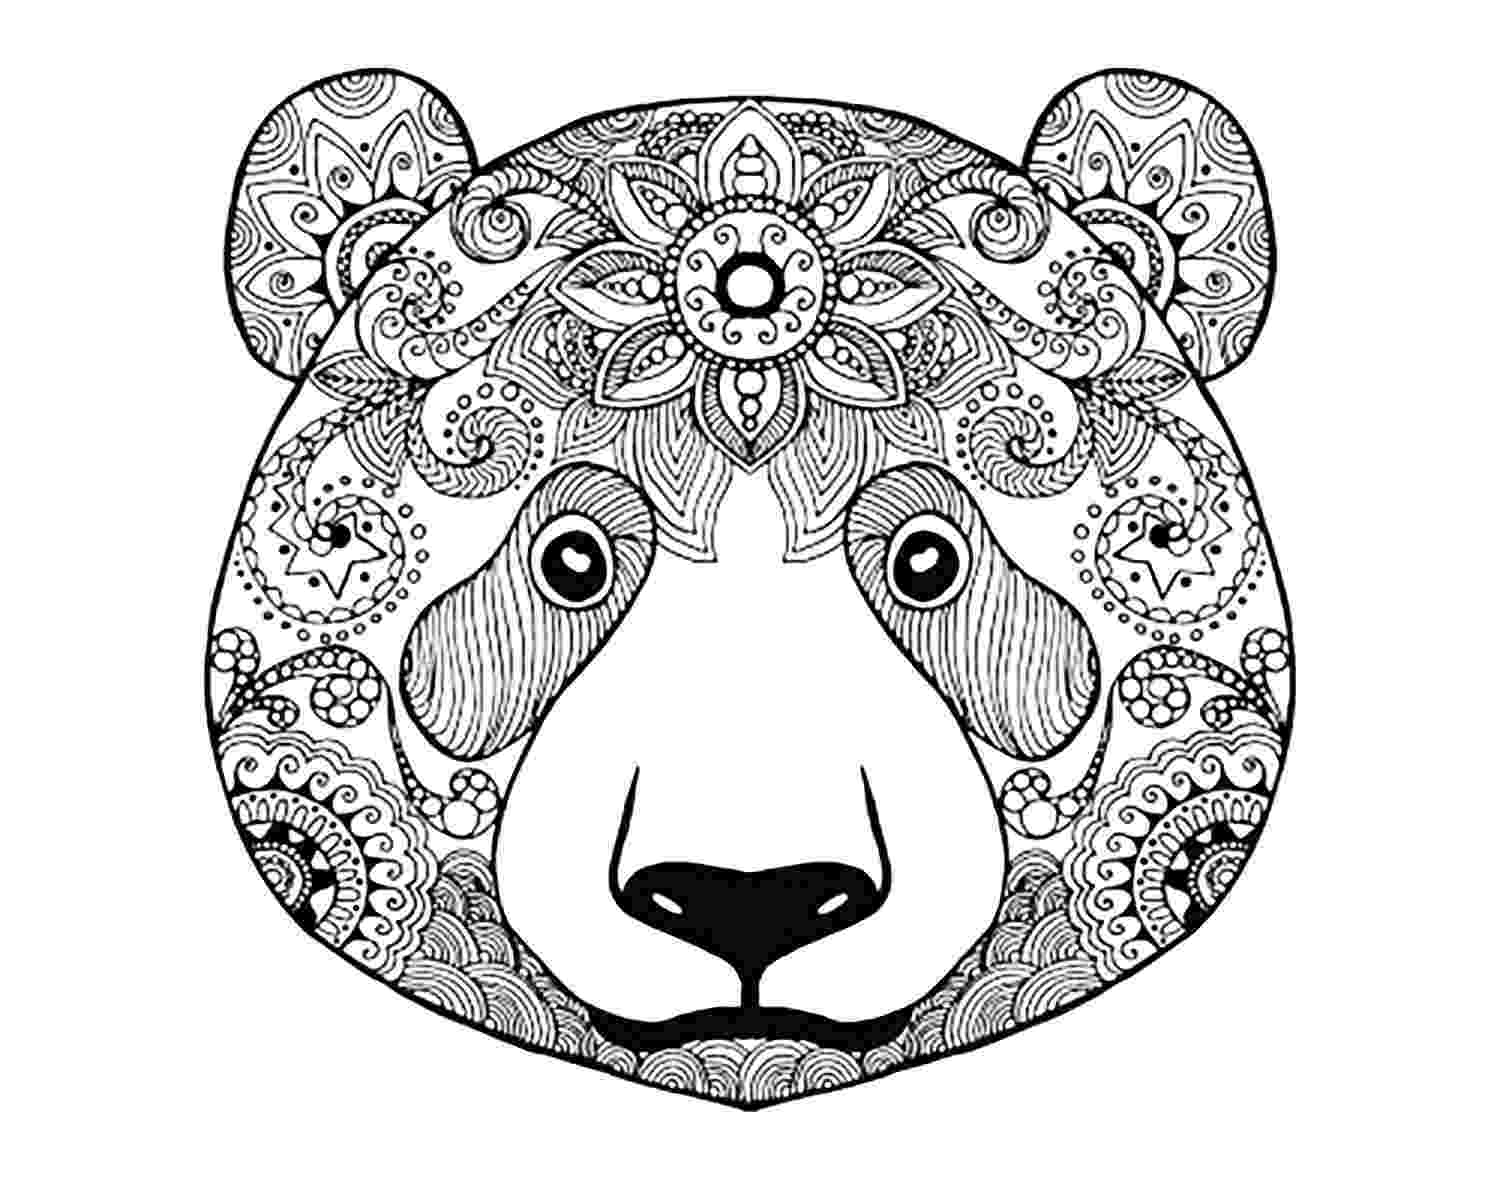 cheetah coloring pages for adults cheetah coloring pages 360coloringpages pages adults coloring cheetah for 